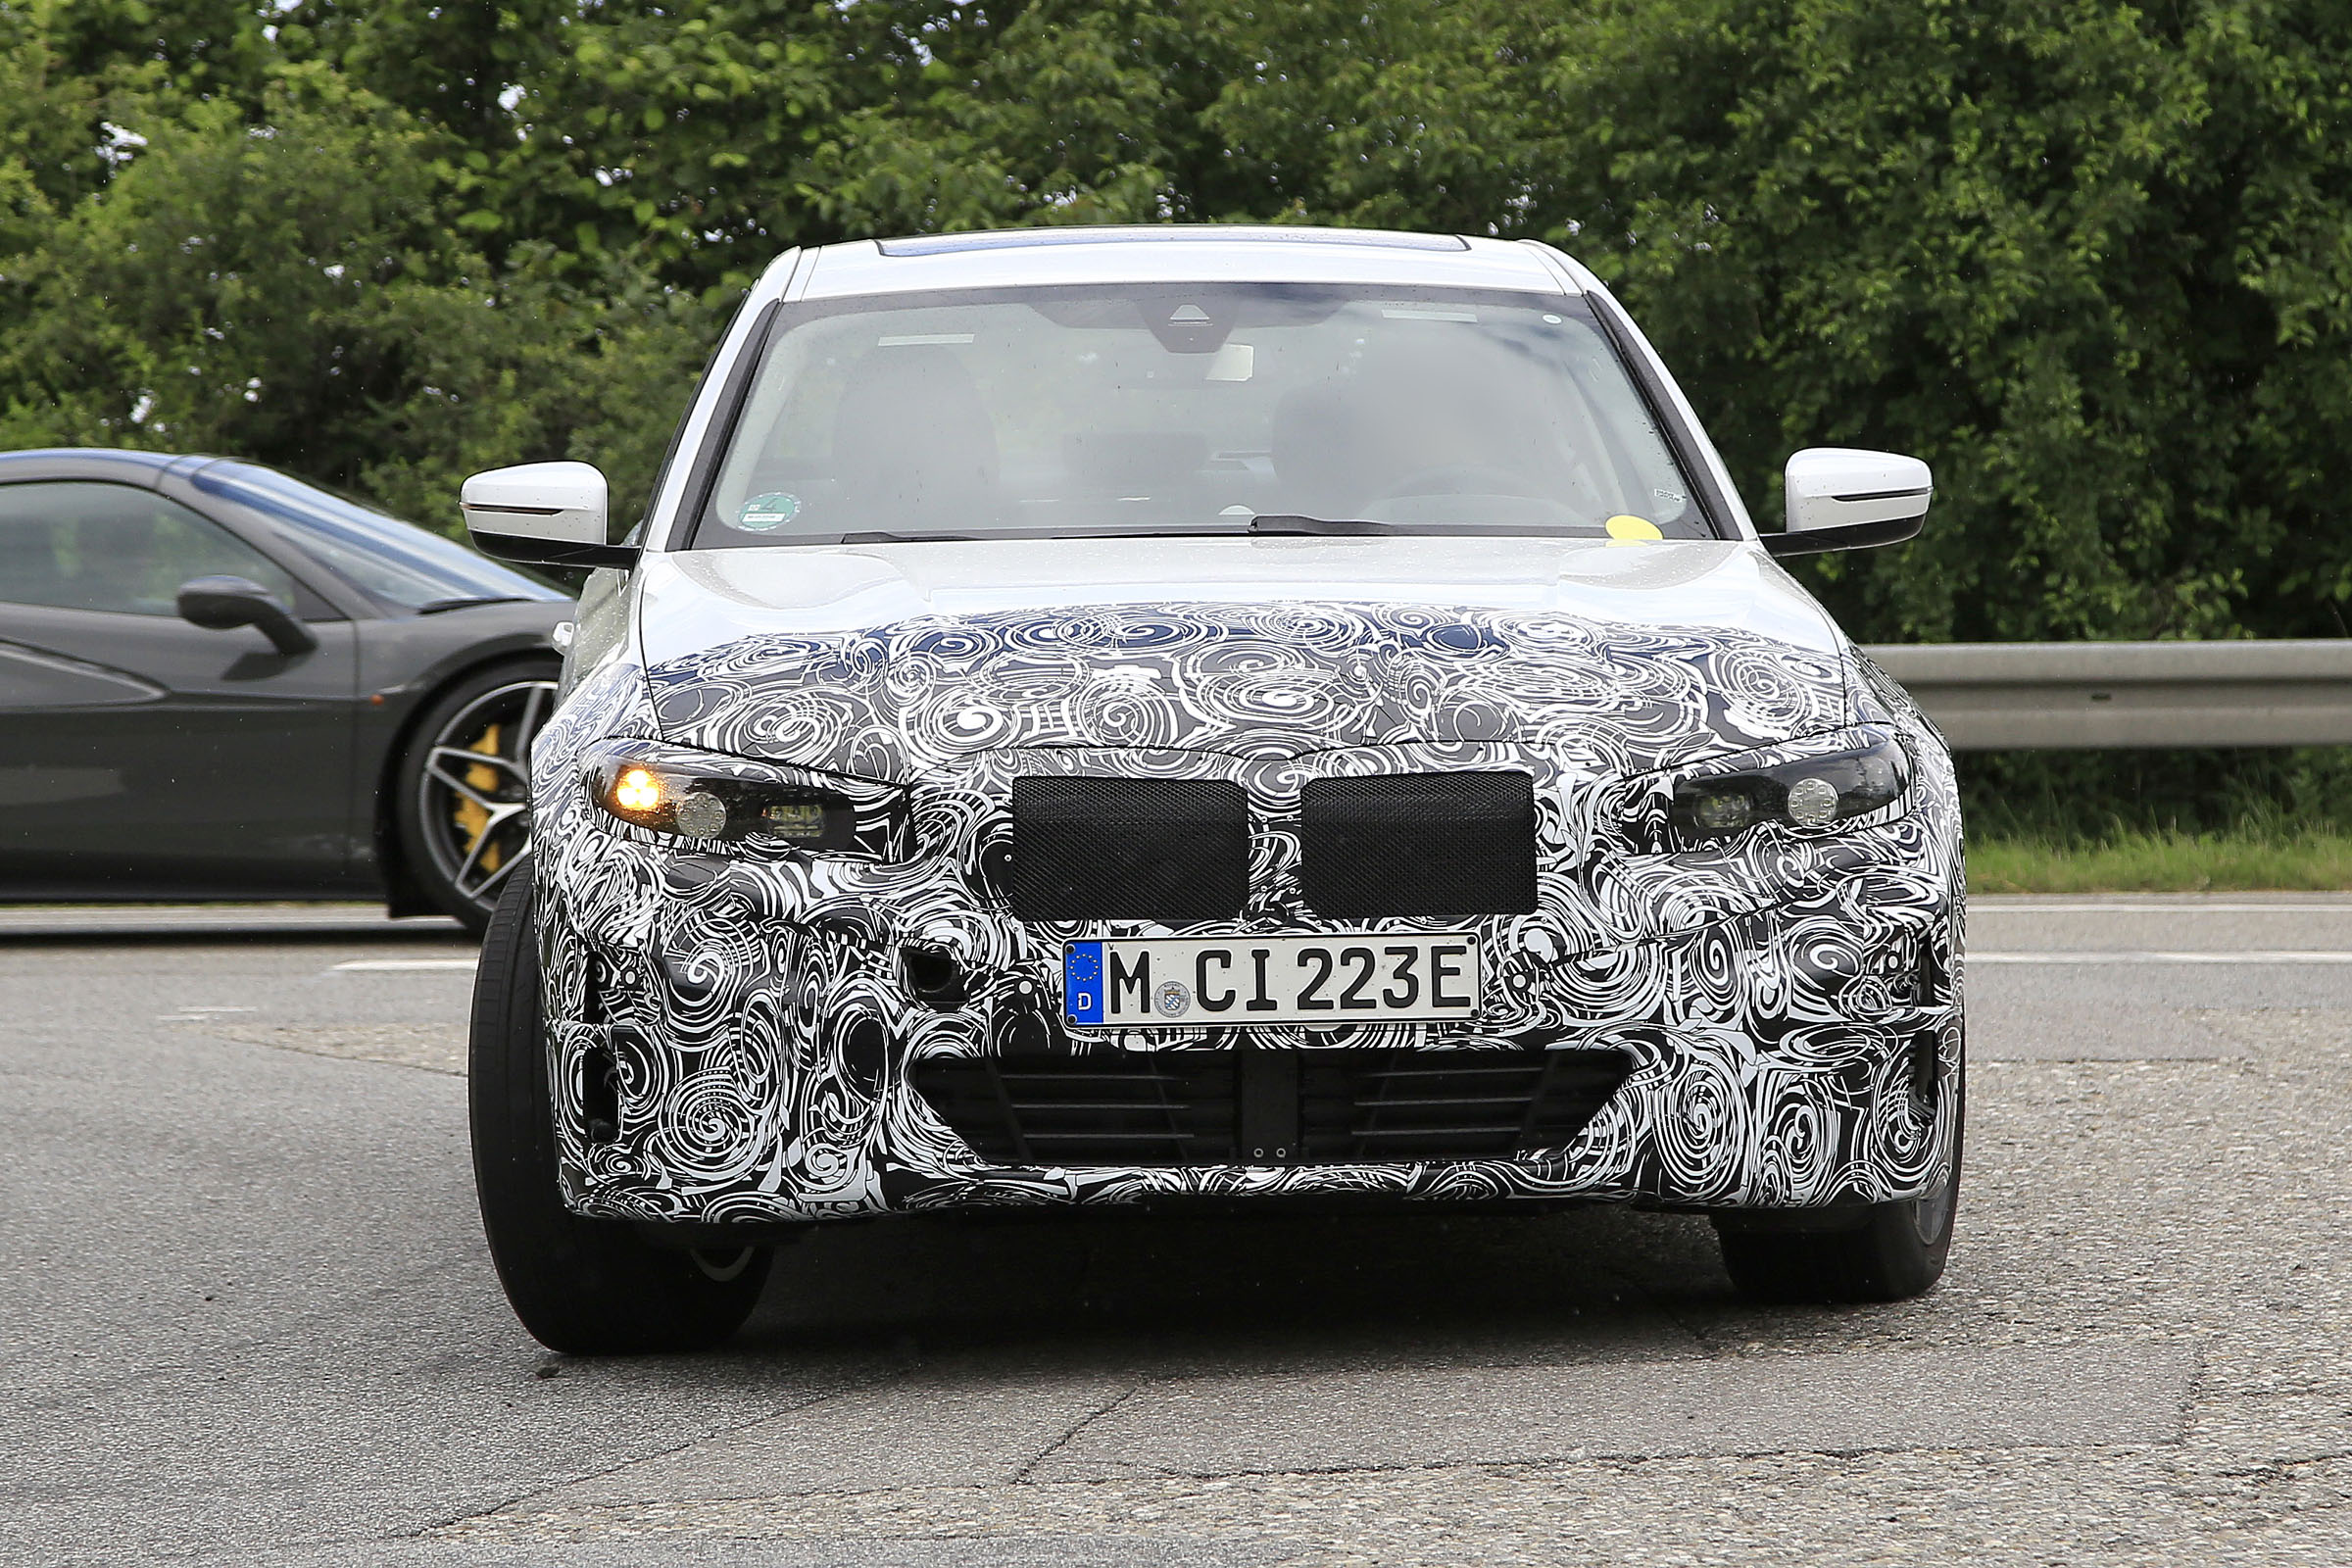 BMW 3 Series electric details and pictures pictures DrivingElectric